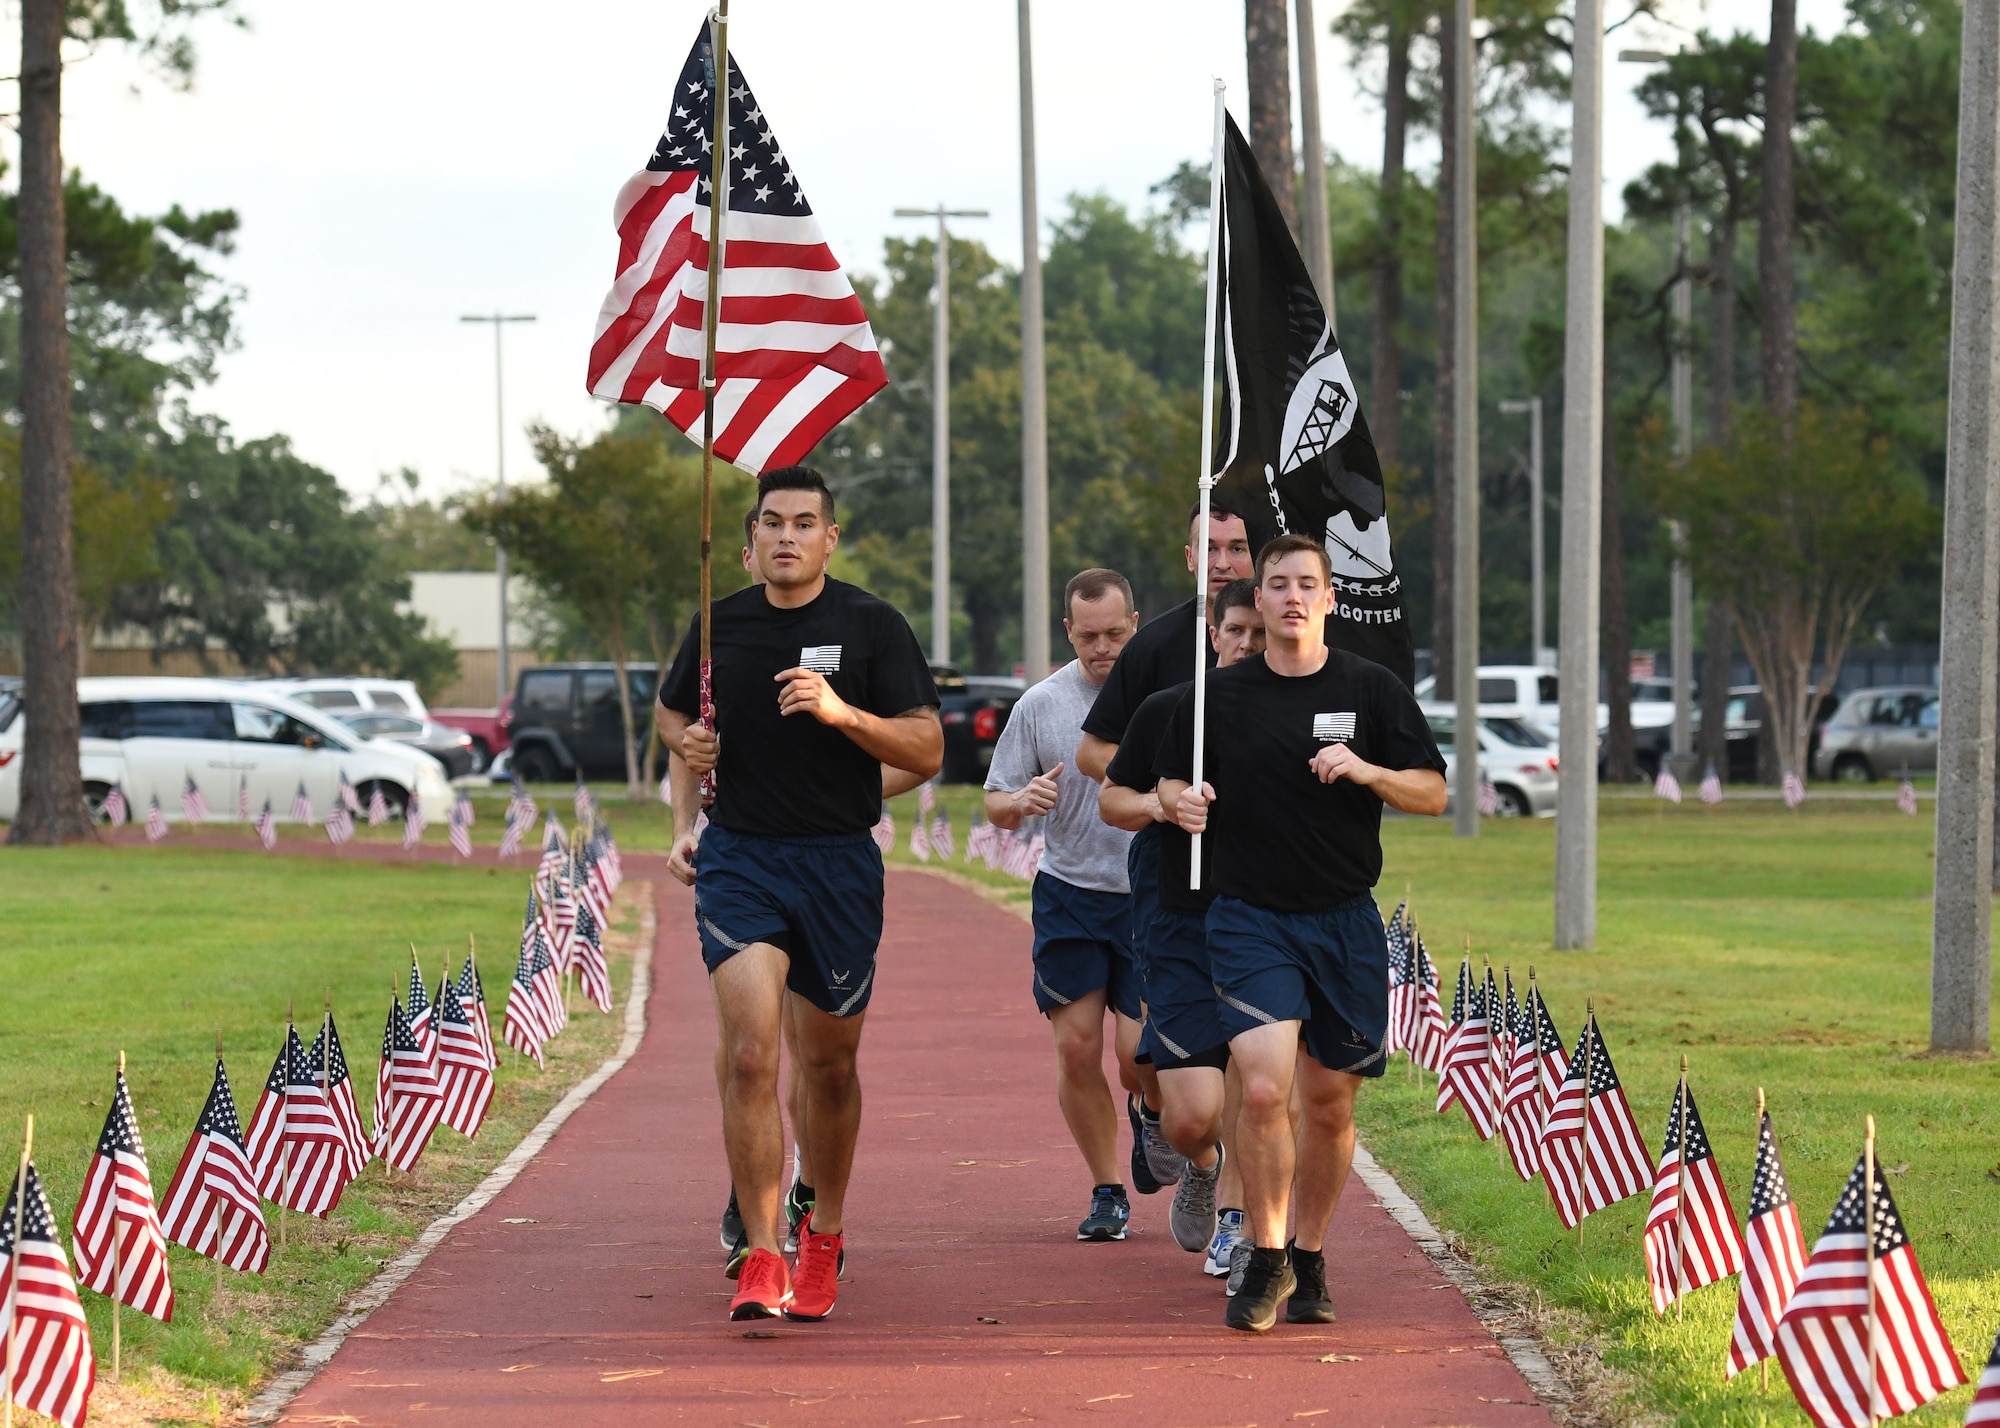 Members of the 81st Training Support Squadron participate in Keesler's POW/MIA 24-hour memorial run and vigil at the Crotwell Track at Keesler Air Force Base, Mississippi, Sept. 20, 2018. The event was held to raise awareness and pay tribute to all prisoners of war and those military members still missing in action. (U.S. Air Force photo by Kemberly Groue)